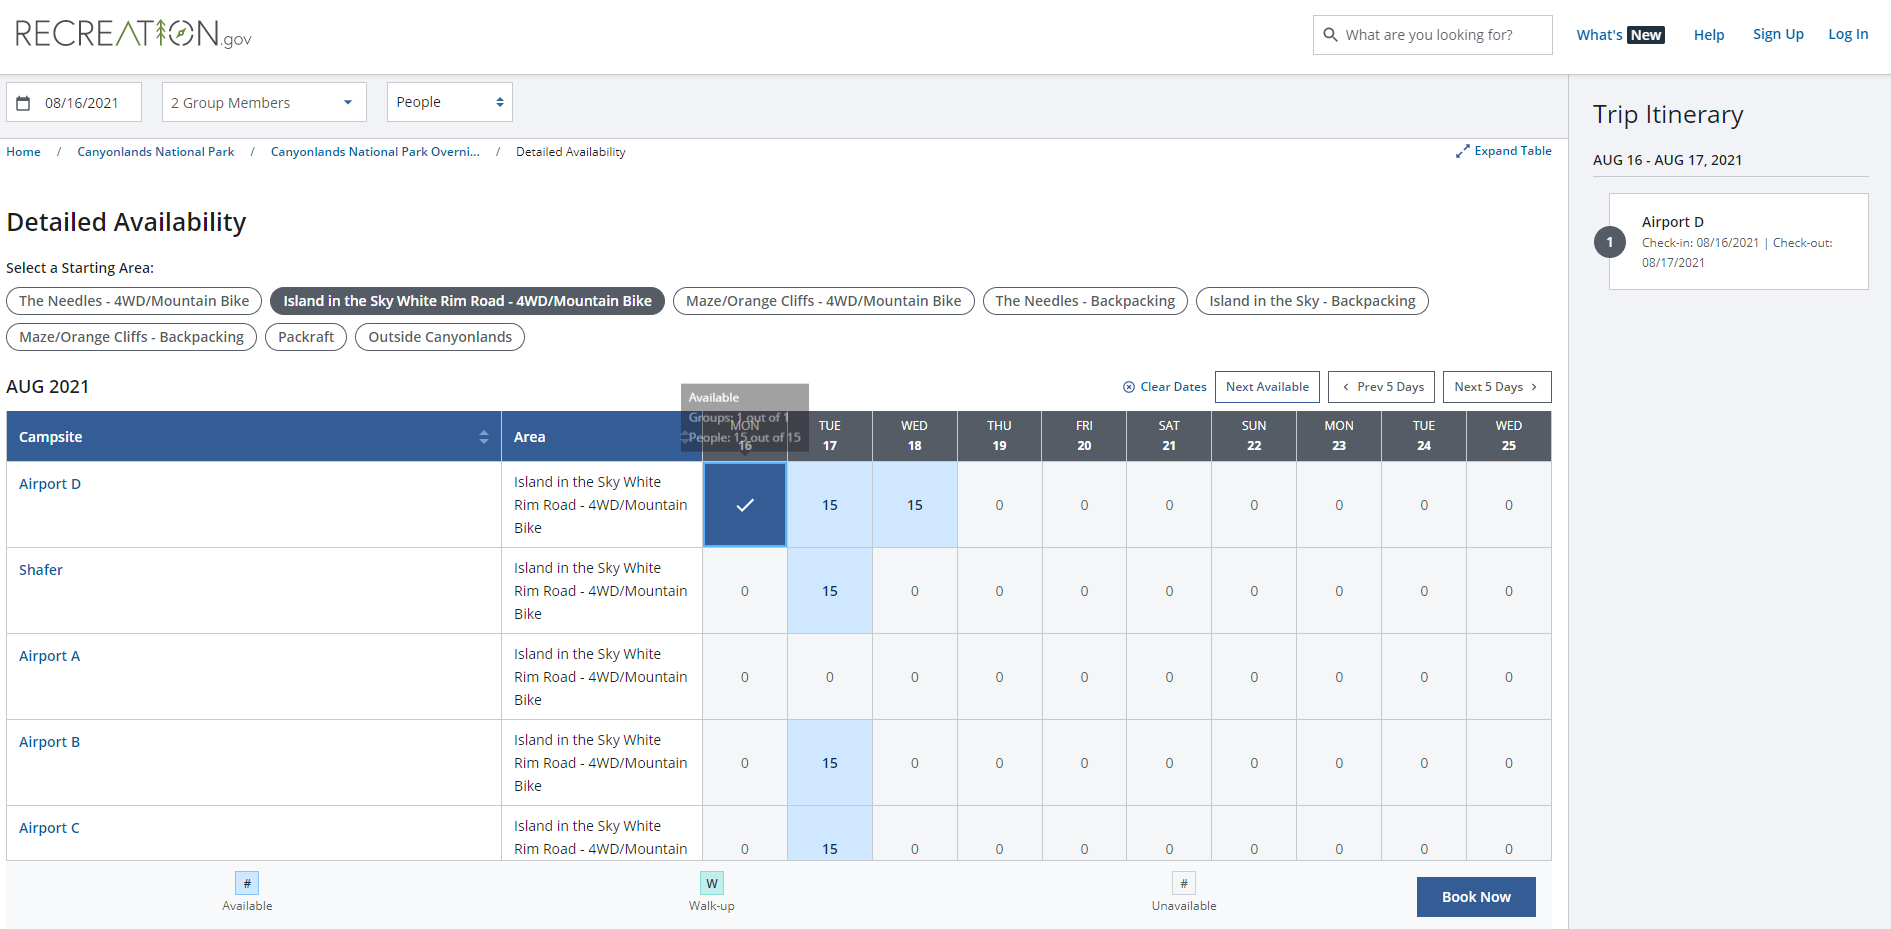 Screenshot of the calendar selection function on recreation.gov.  A dark blue checkmark appears for the selected site.